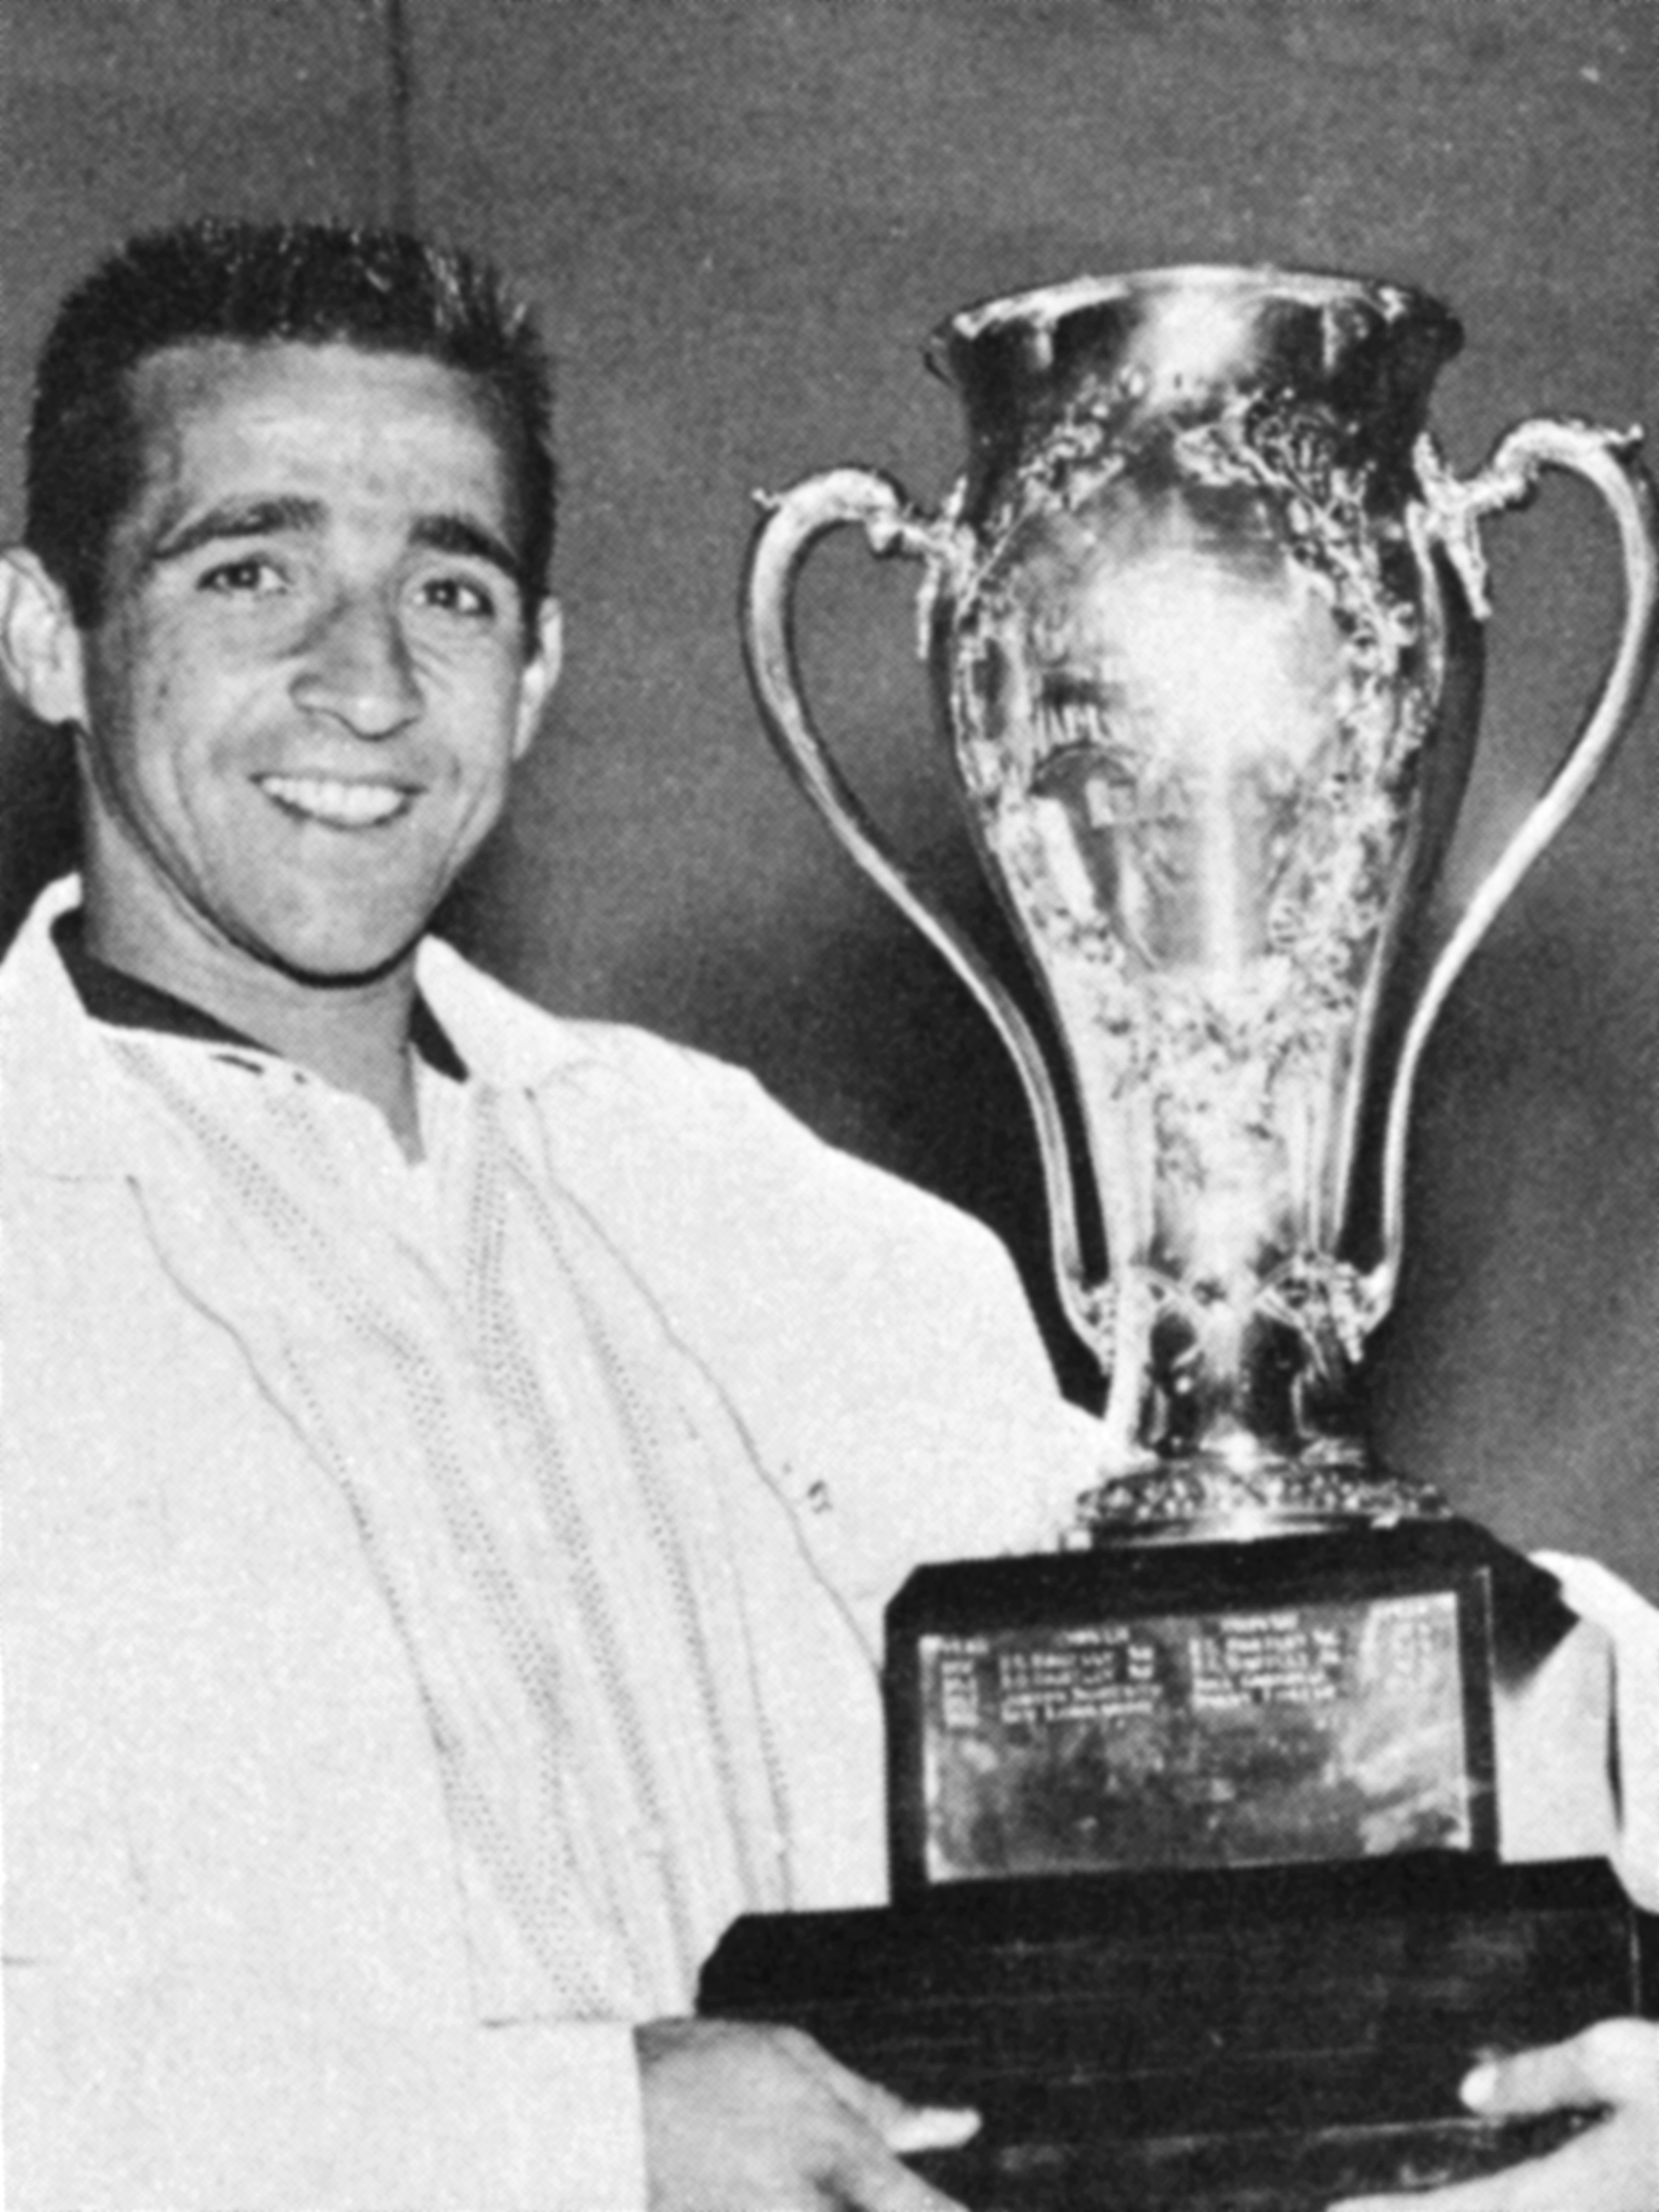 Jack Regas with the Indiana Governor's Cup trophy, 1957